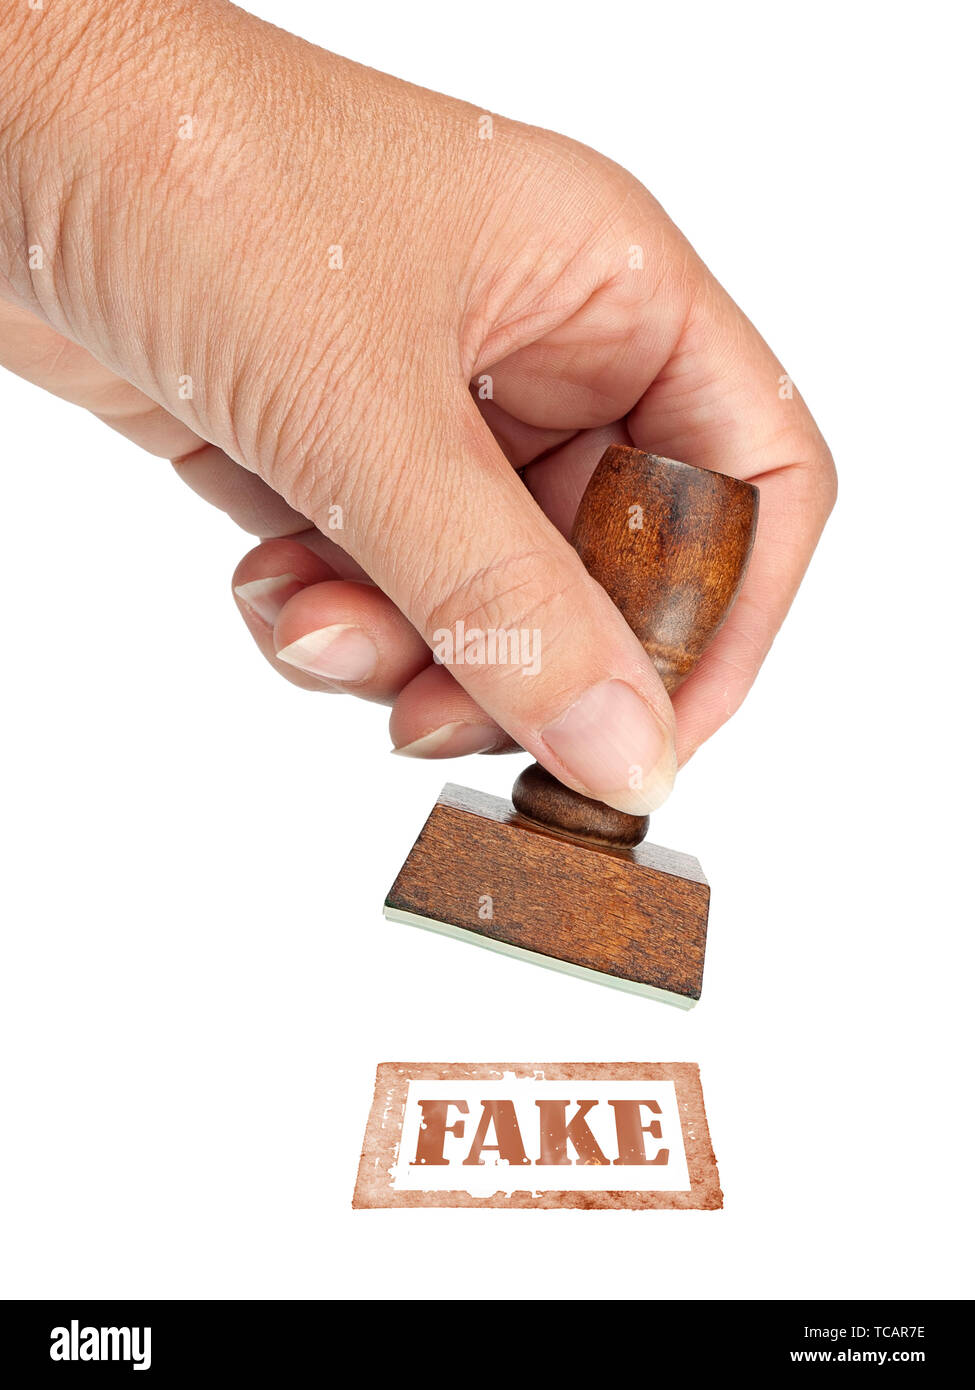 Genuine fake, rubber stamp. My hand with rubber stamp isolated on white. Business, politics or trade ethical concept. Stock Photo